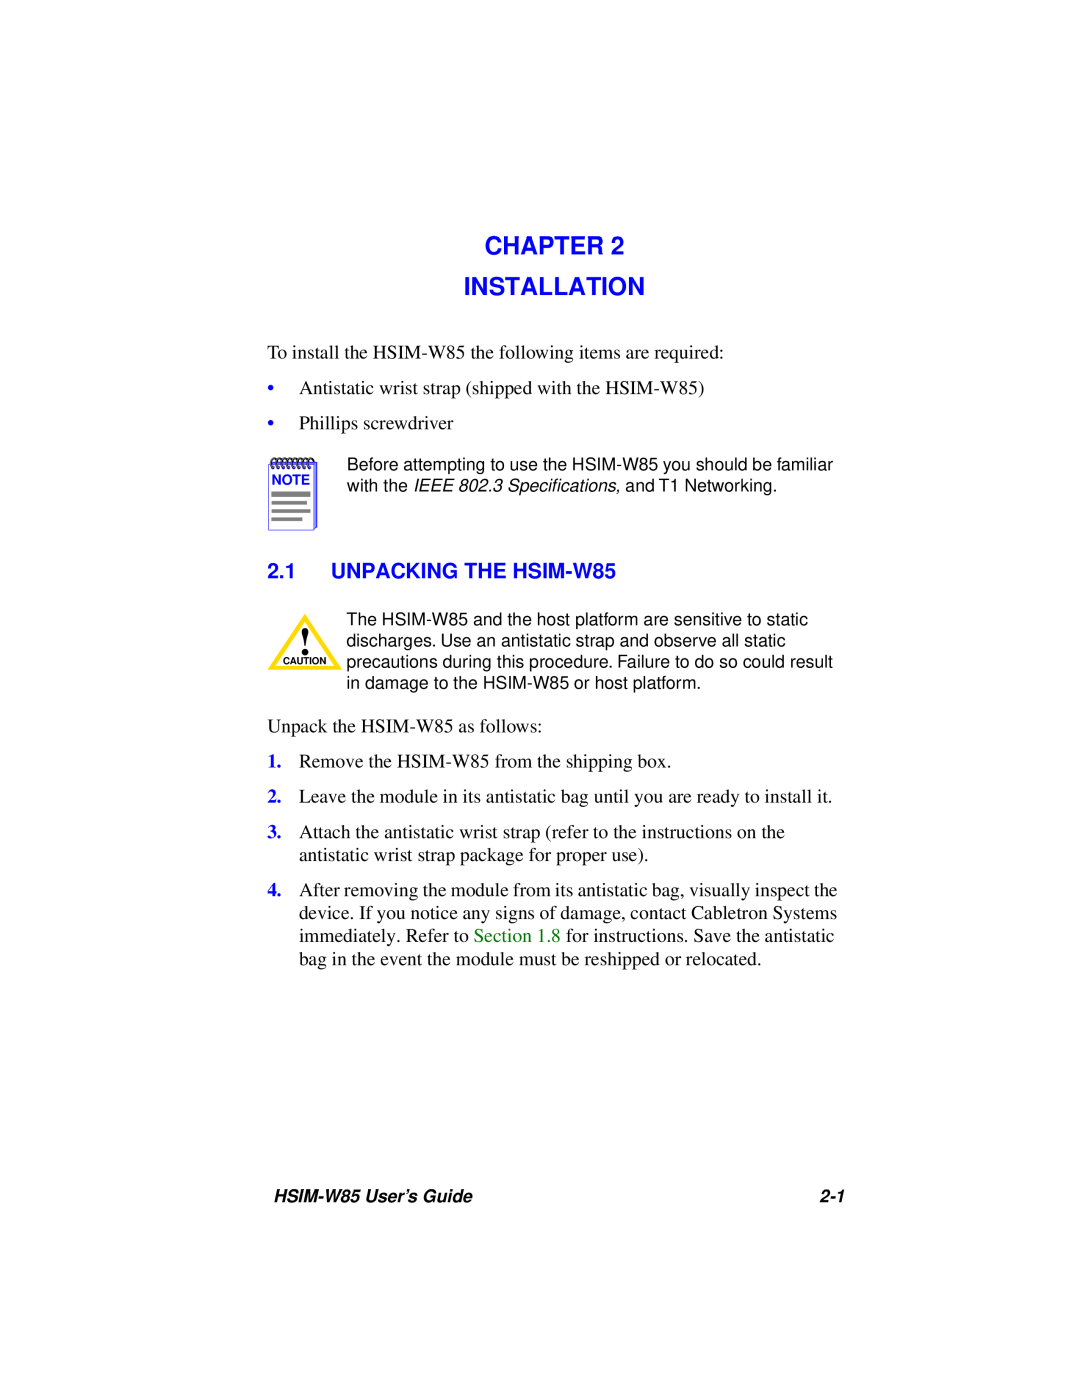 Cabletron Systems manual Chapter Installation, UNPACKING THE HSIM-W85 